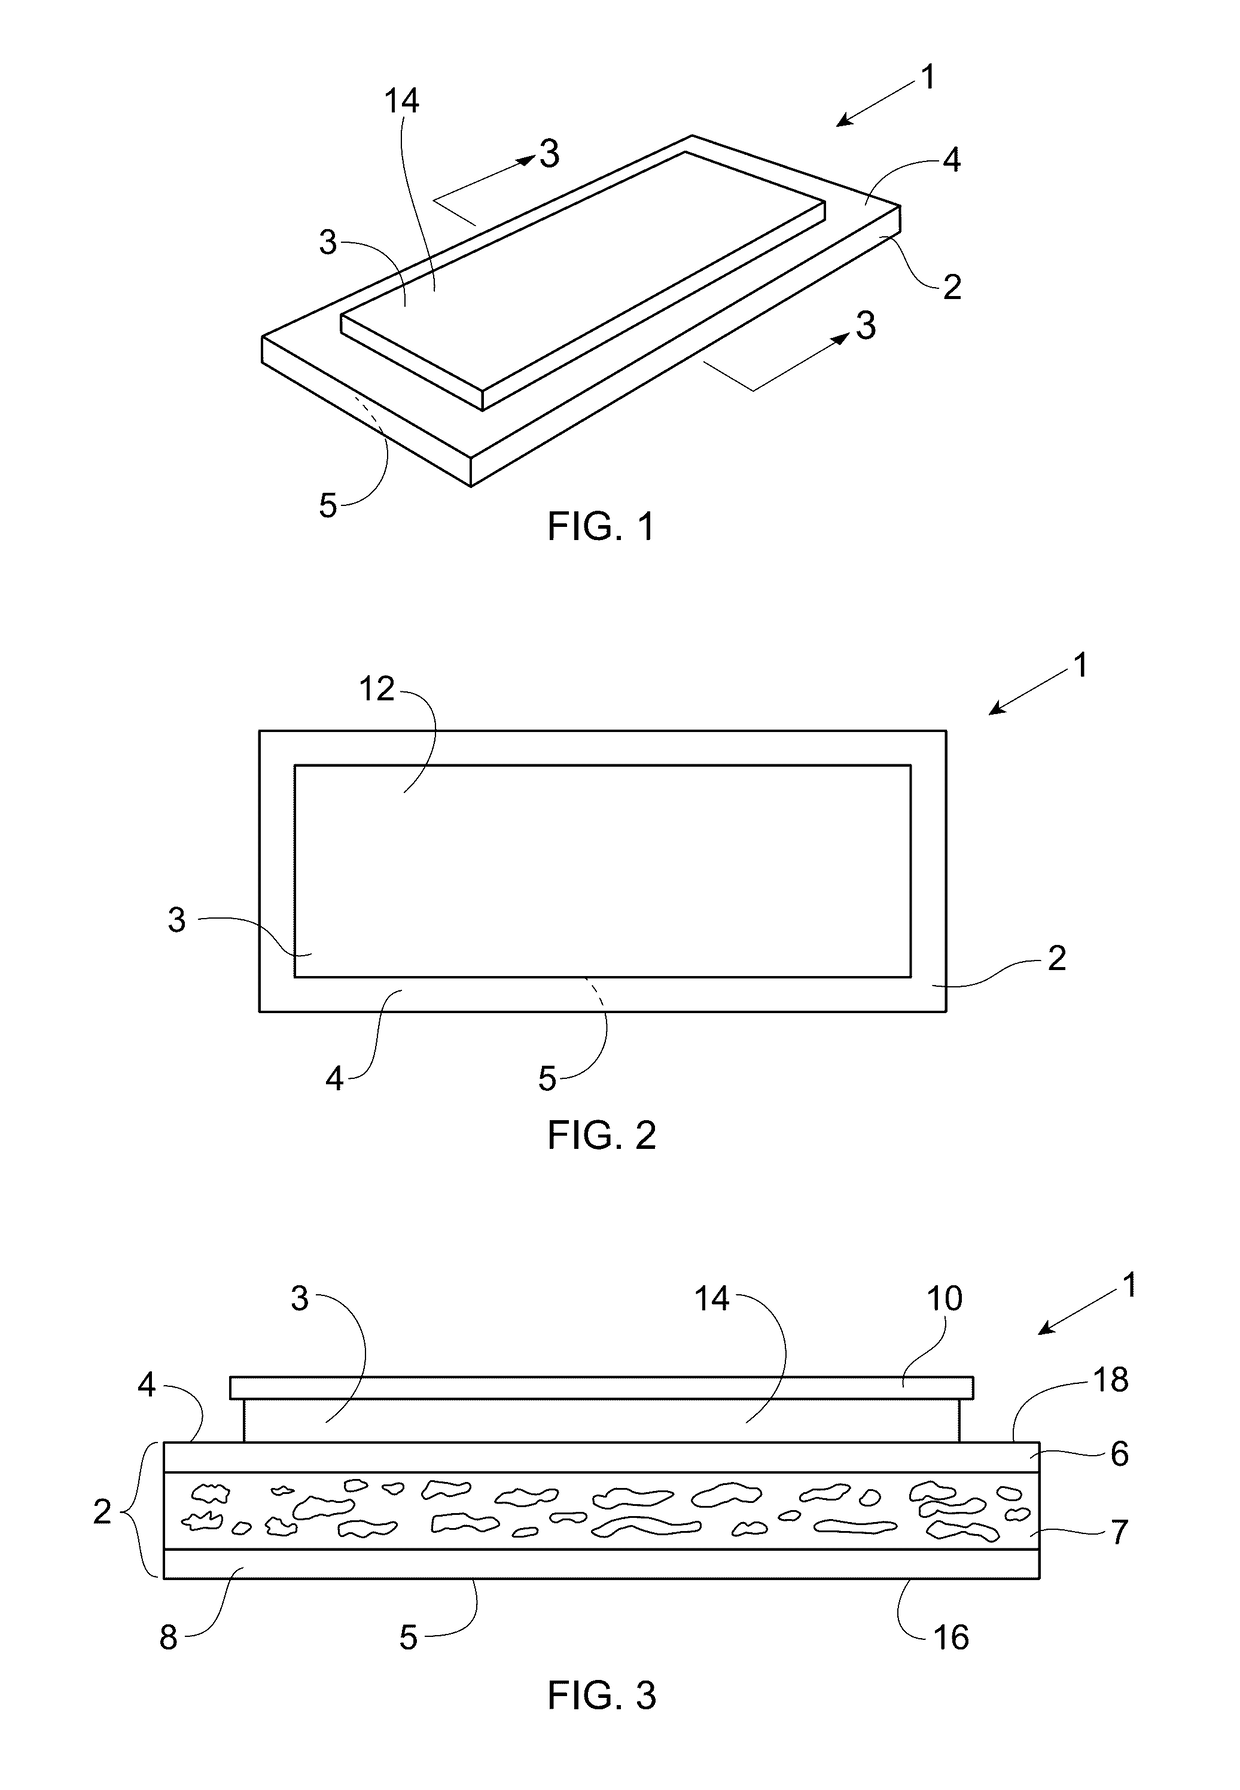 Barrier Patch of a Foamed Film and Methods of Improving Skin Appearance